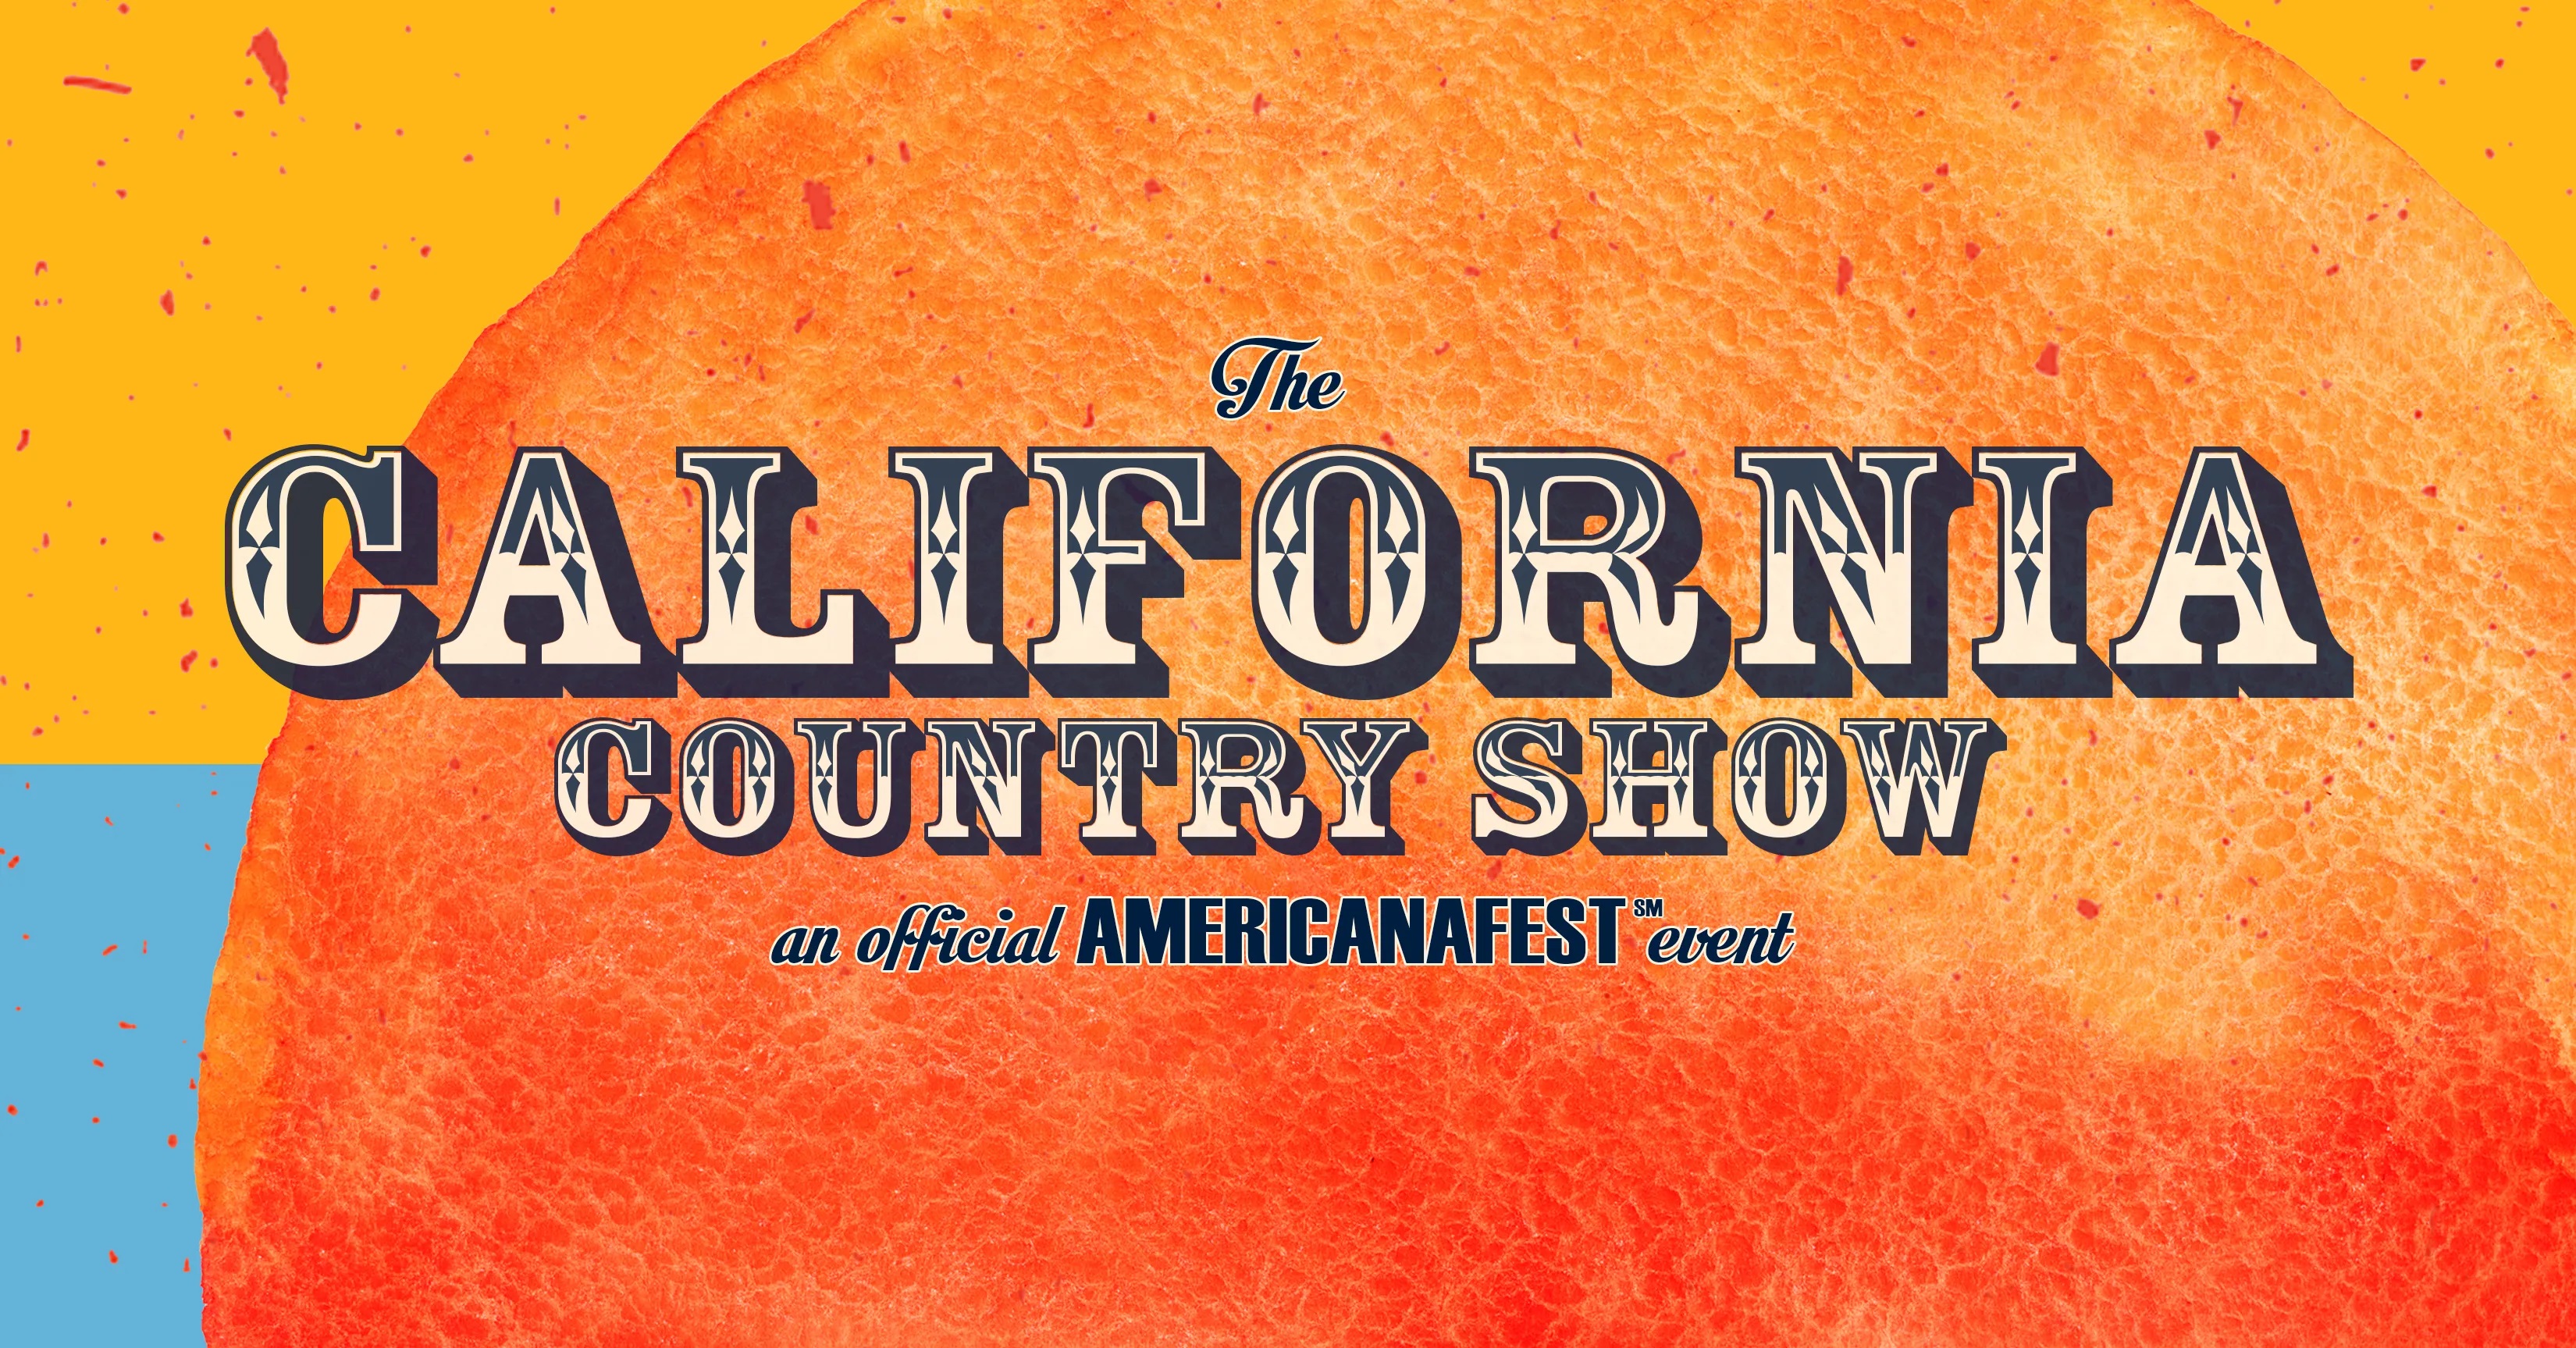 THE CALIFORNIA COUNTRY SHOW RETURNS TO AMERICANAFEST 2021